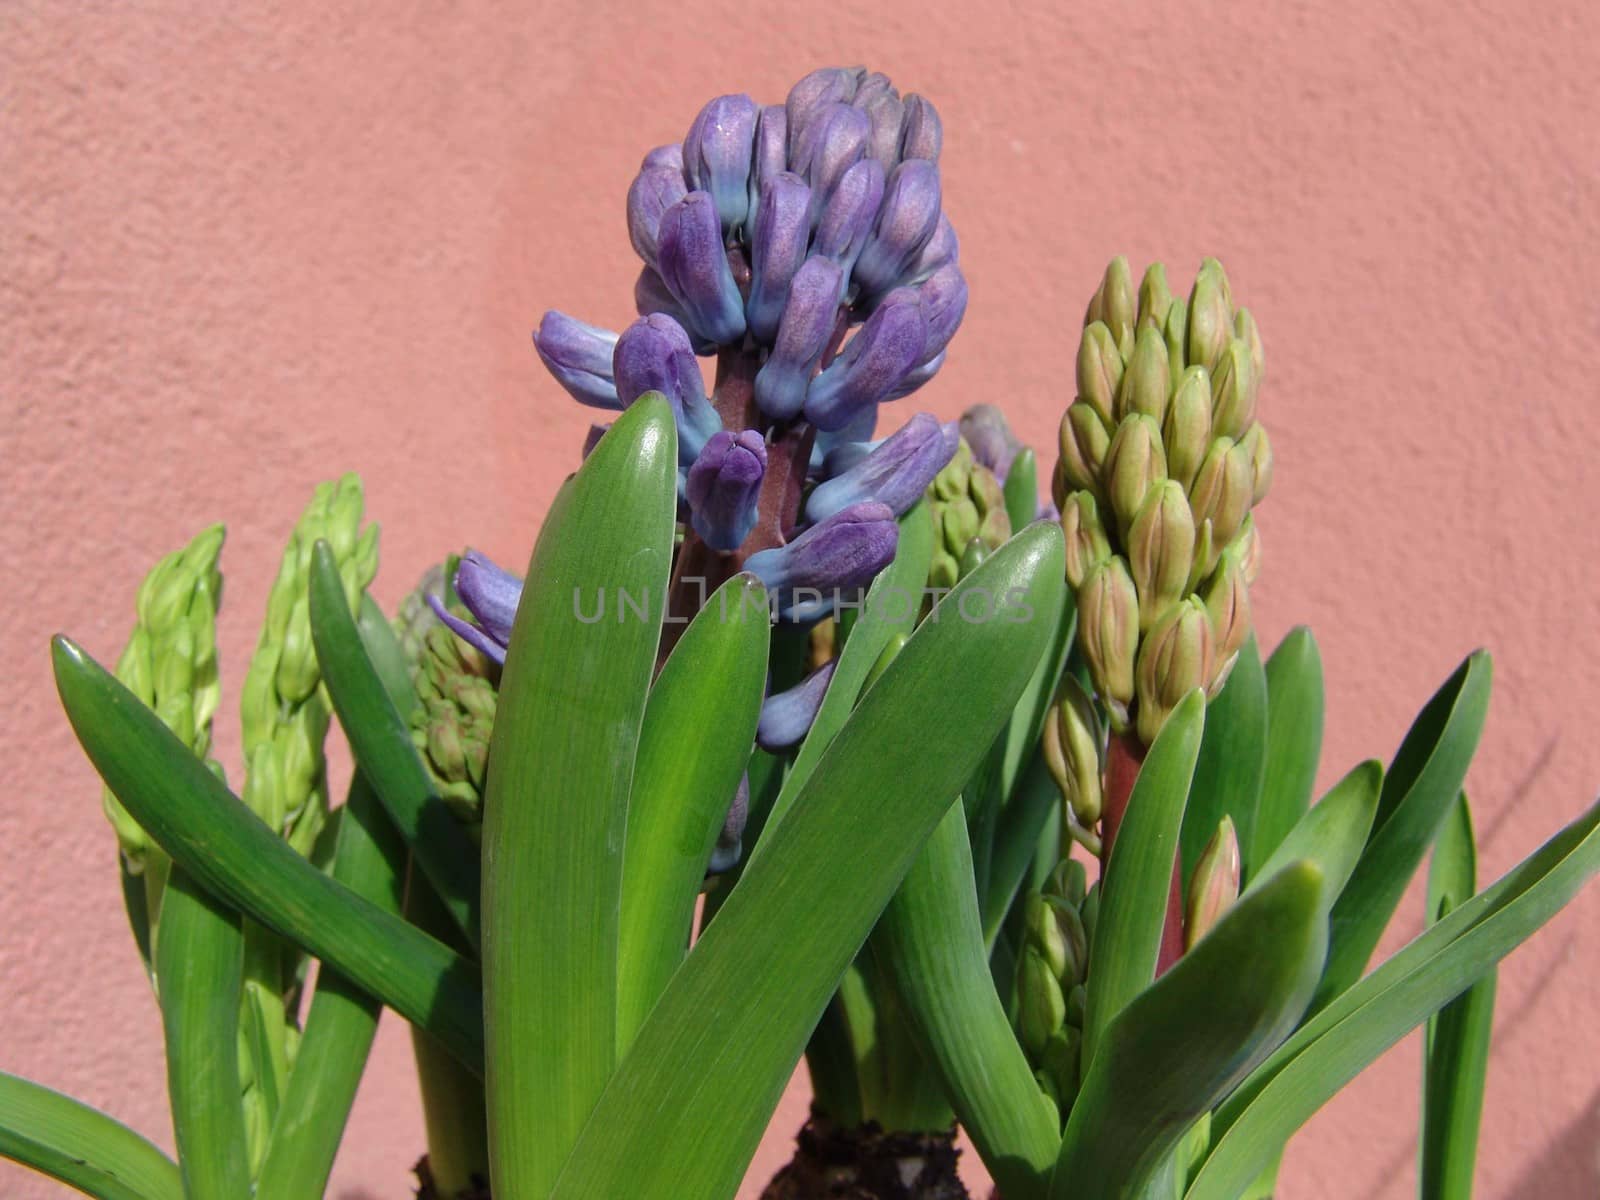 Flower hyacinth Hyacinth. Hyacinths bloom in early spring are bright and very fragrant flowers.